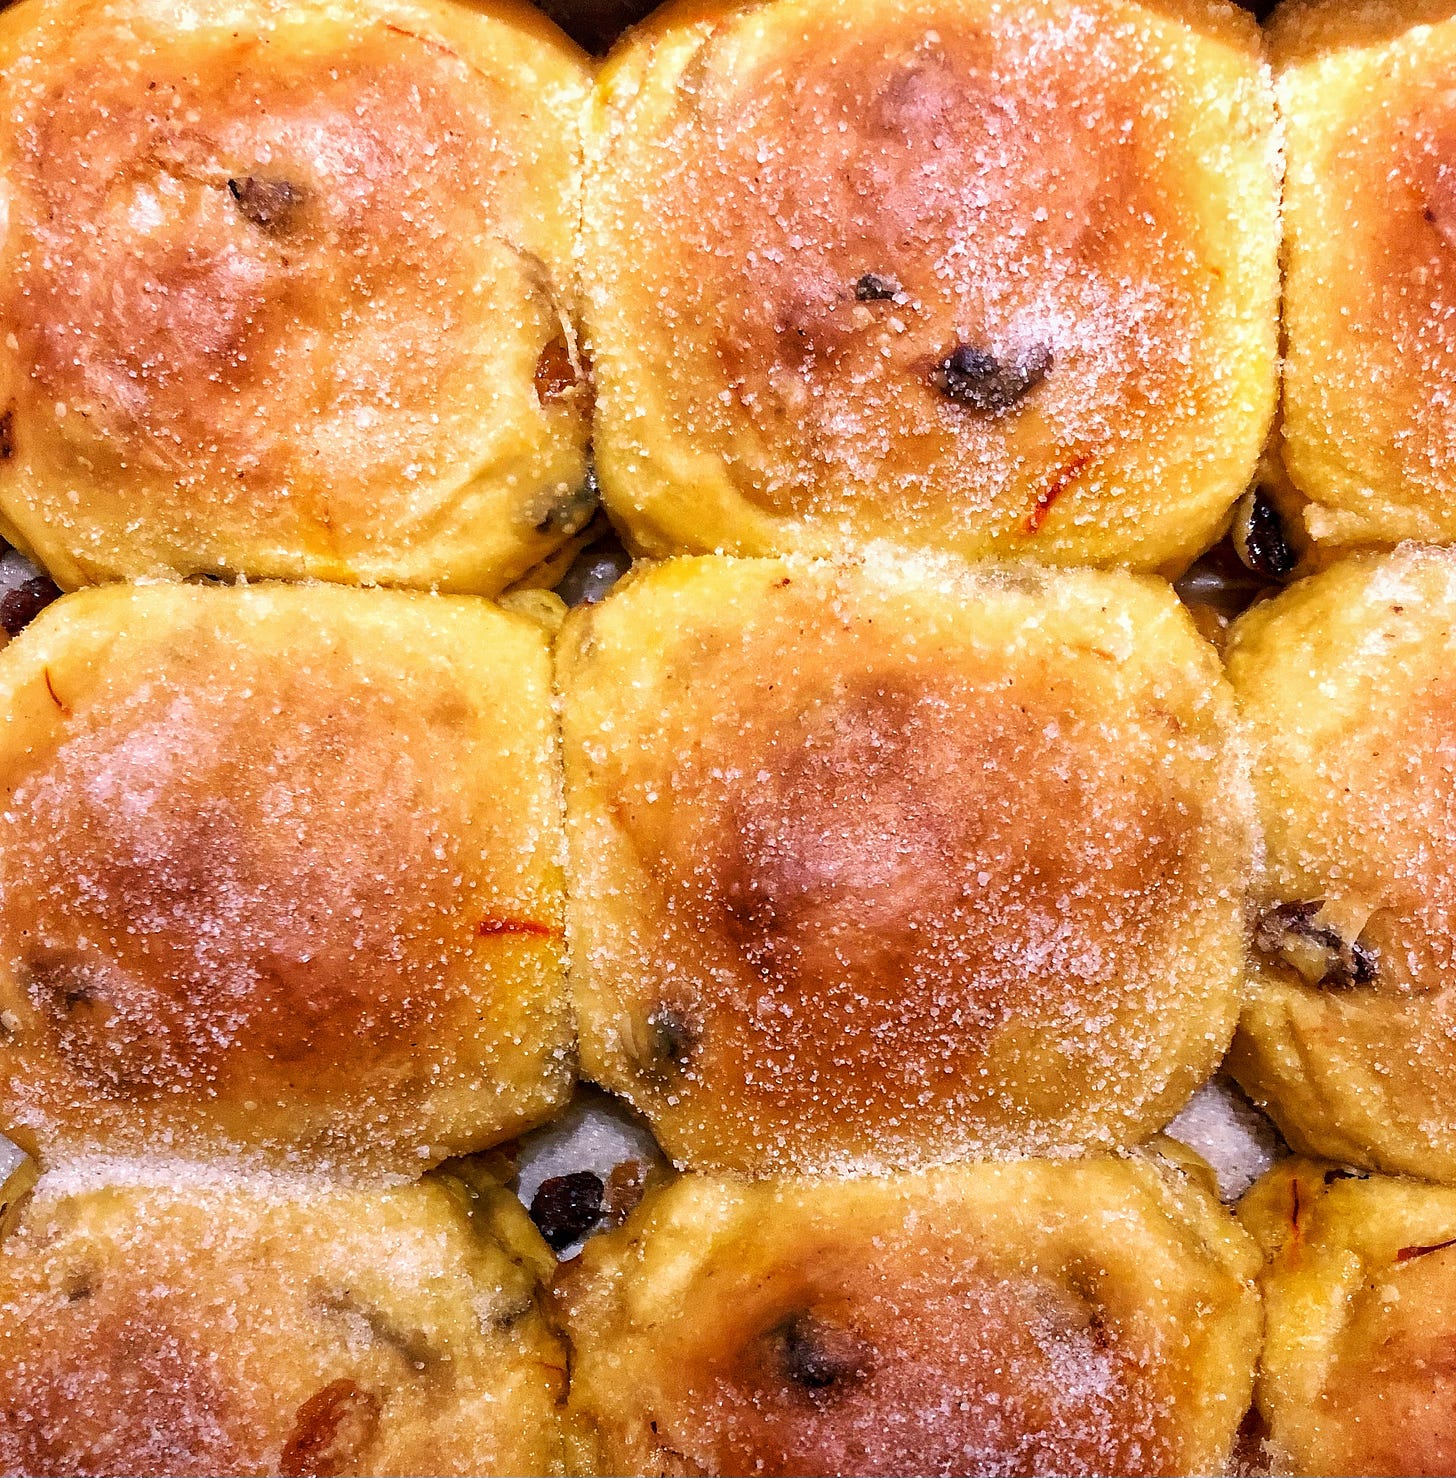 Yellow-tinted buns with dark raisins and saffron threads interspersed and a coating of granulated sugar.